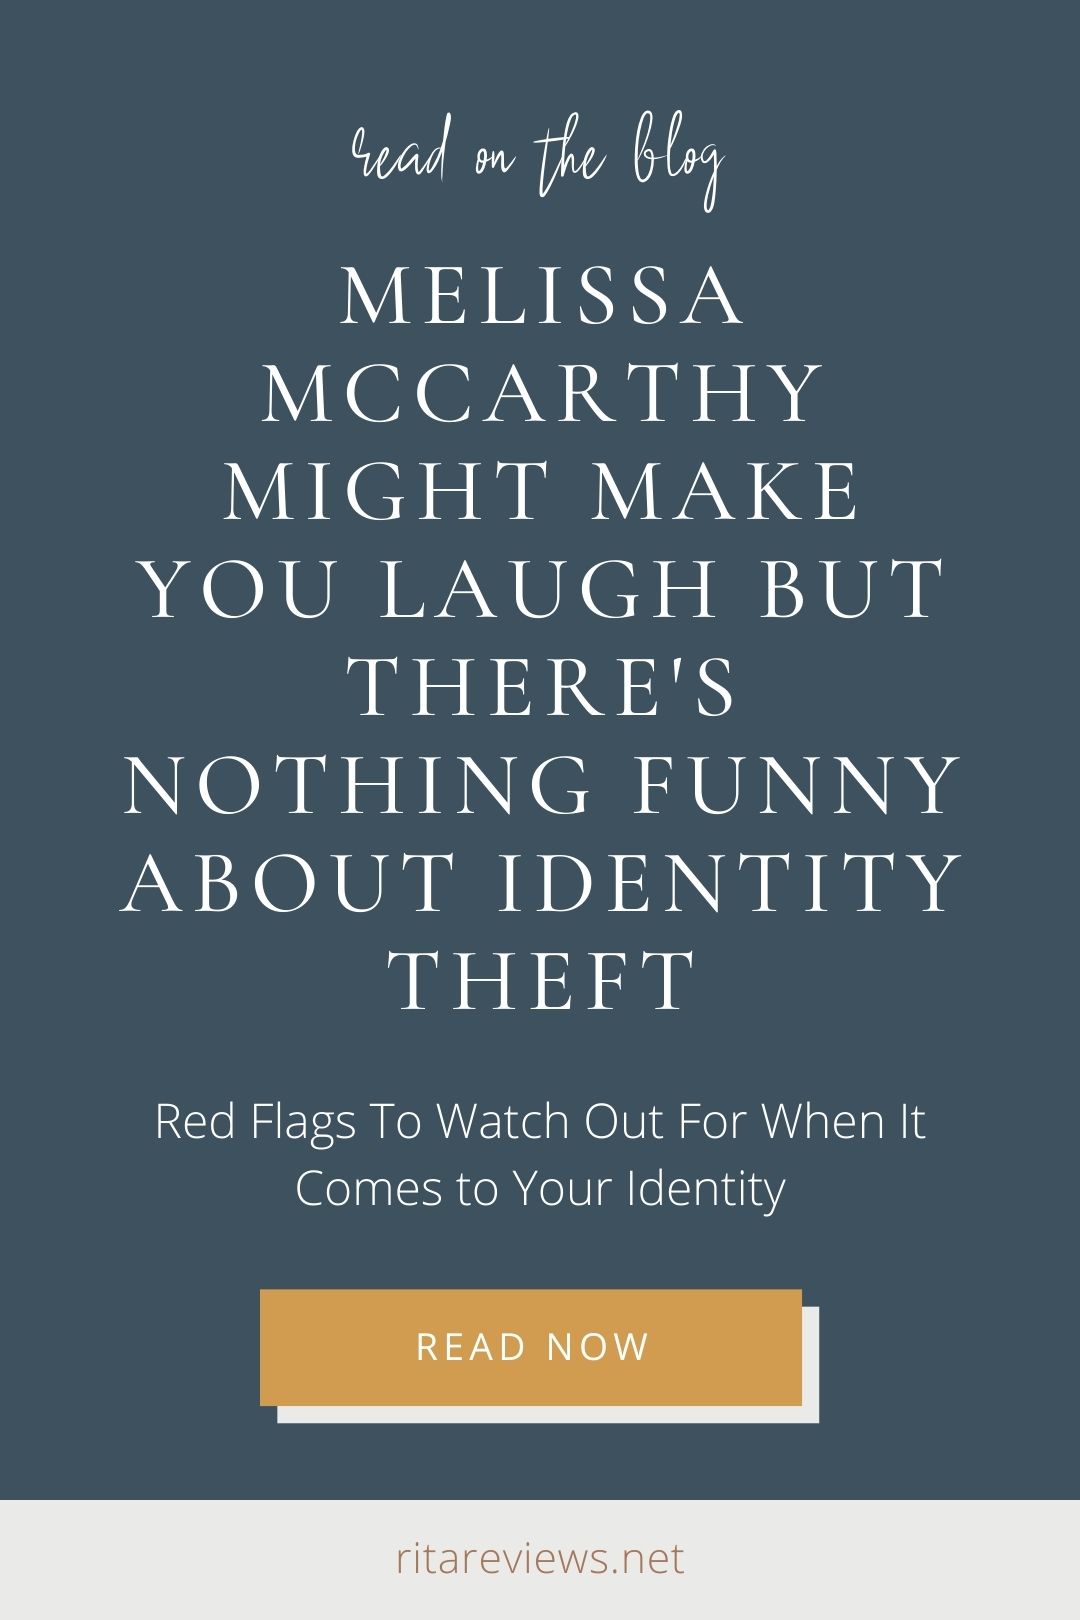 Melissa McCarthy Might Make You Laugh But There's Nothing Funny About Identity Theft